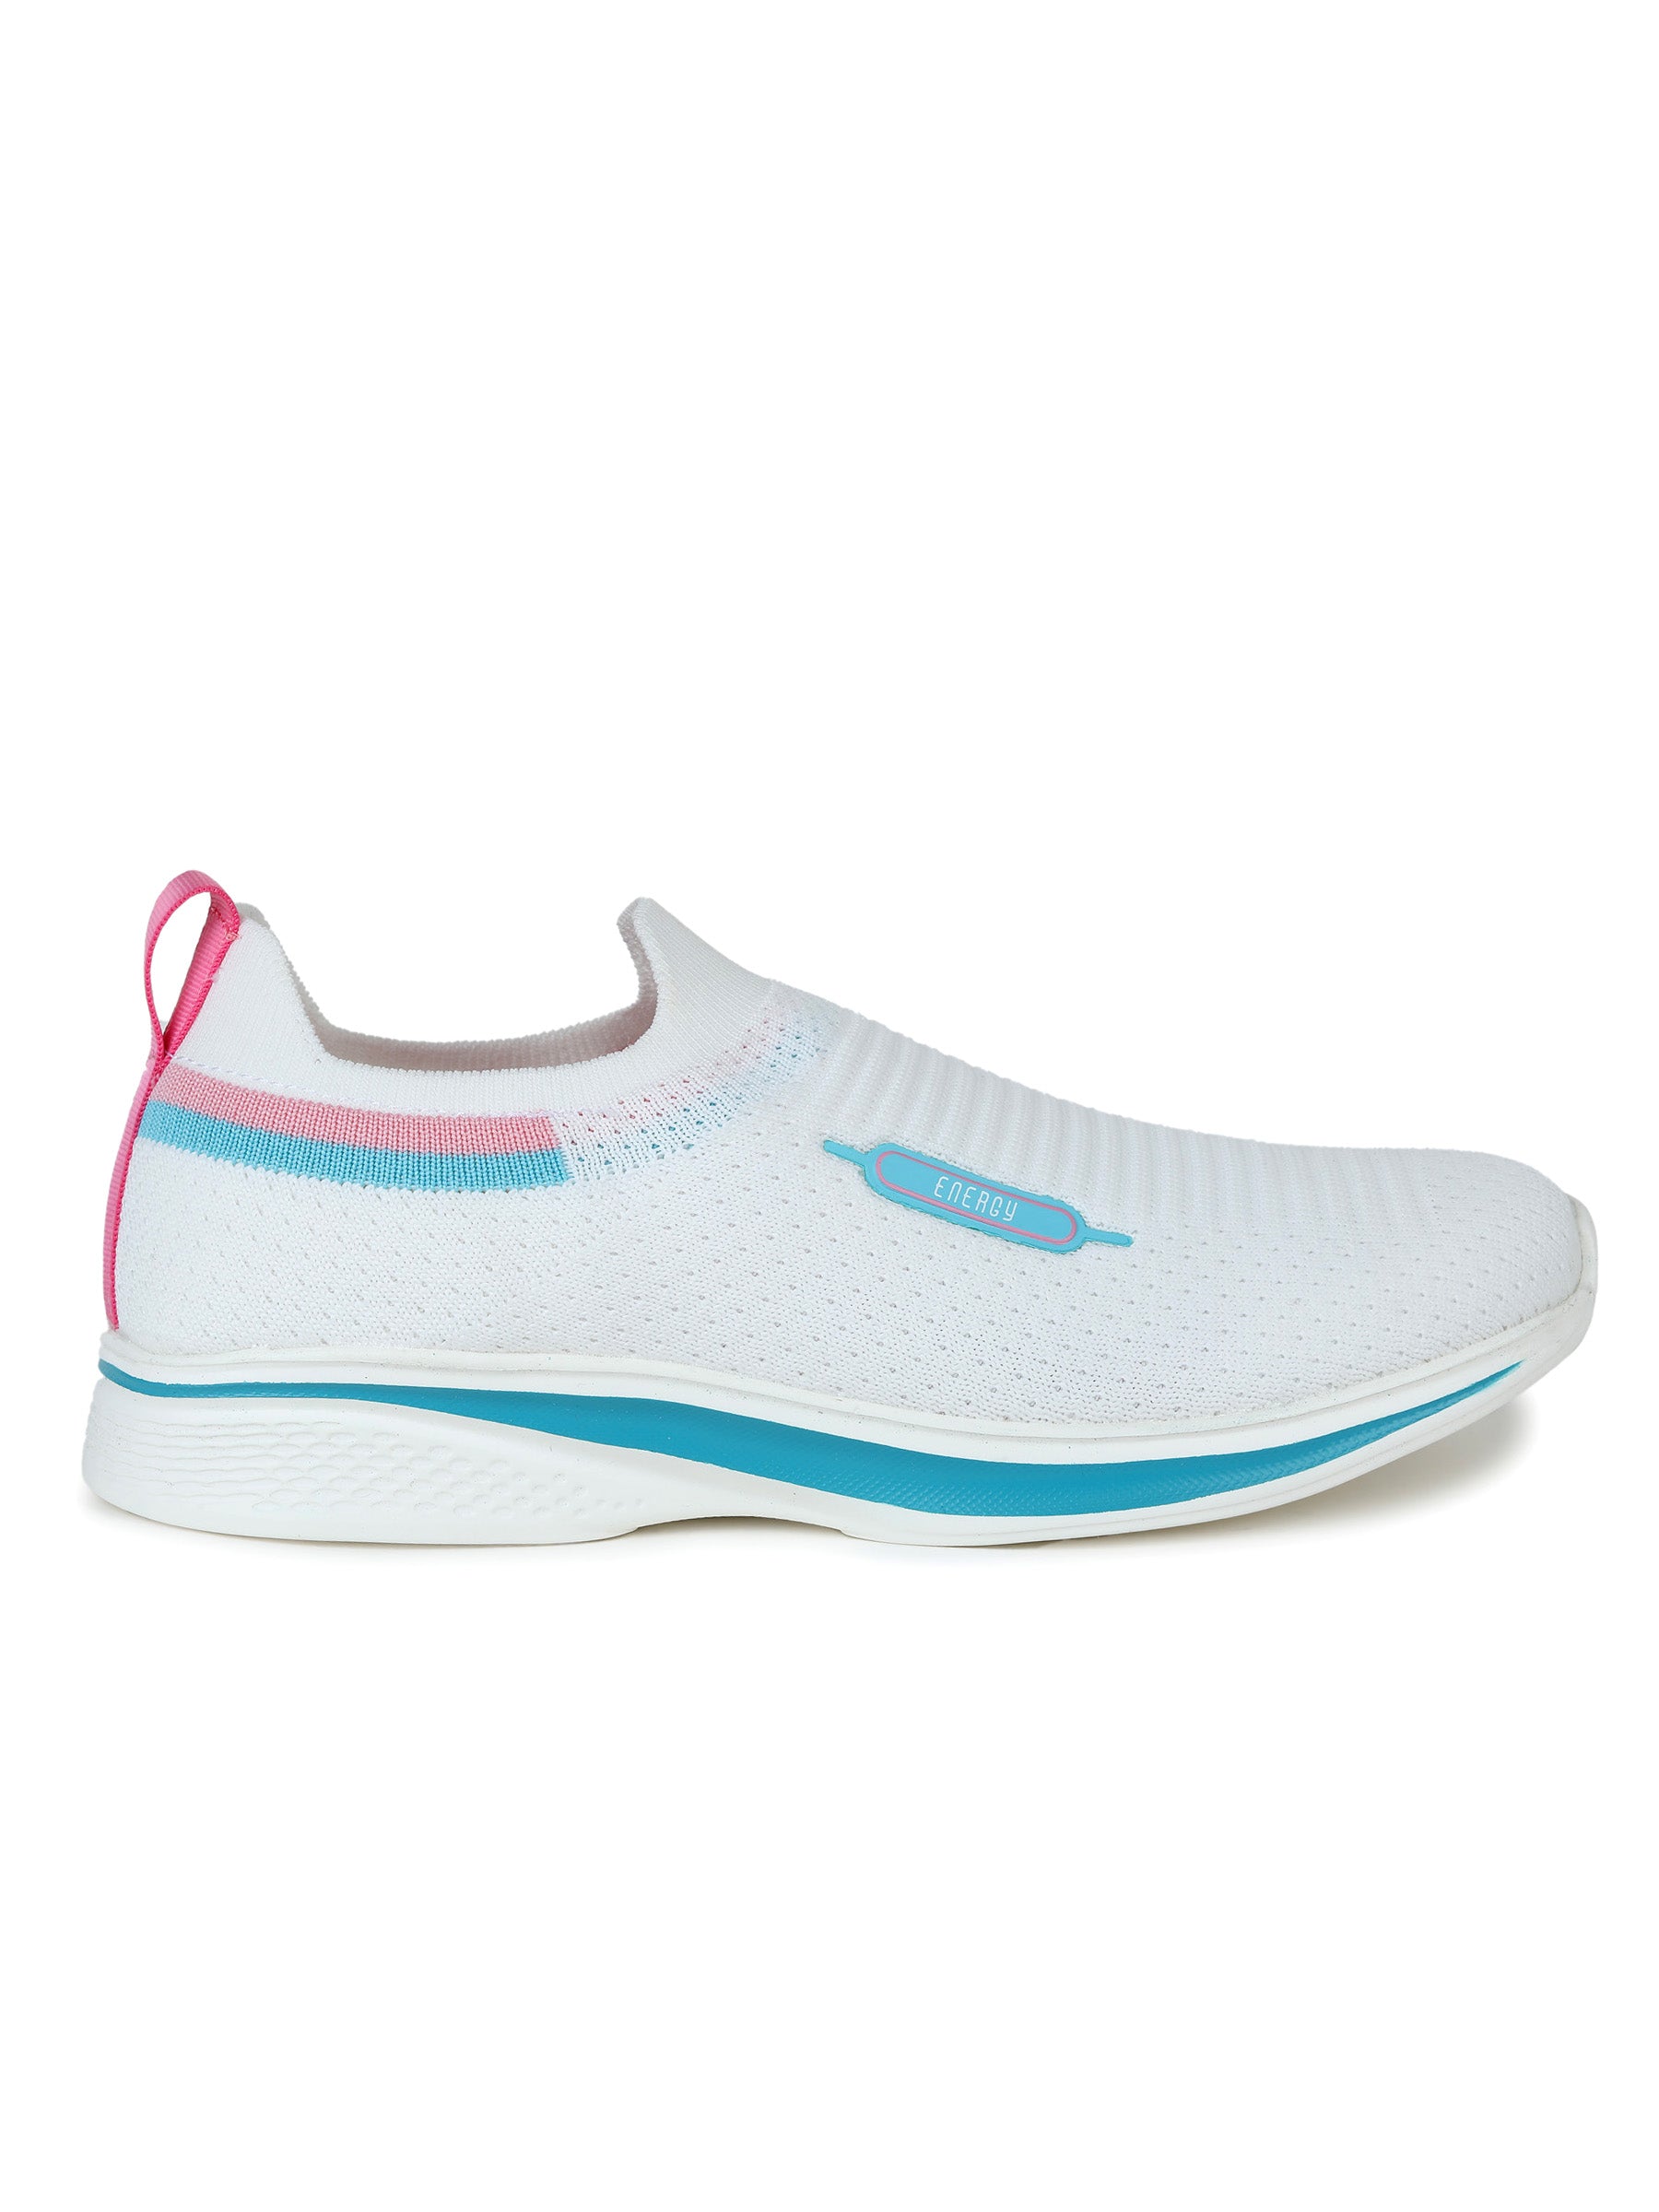 LILY-L SPORTS SHOES FOR WOMEN